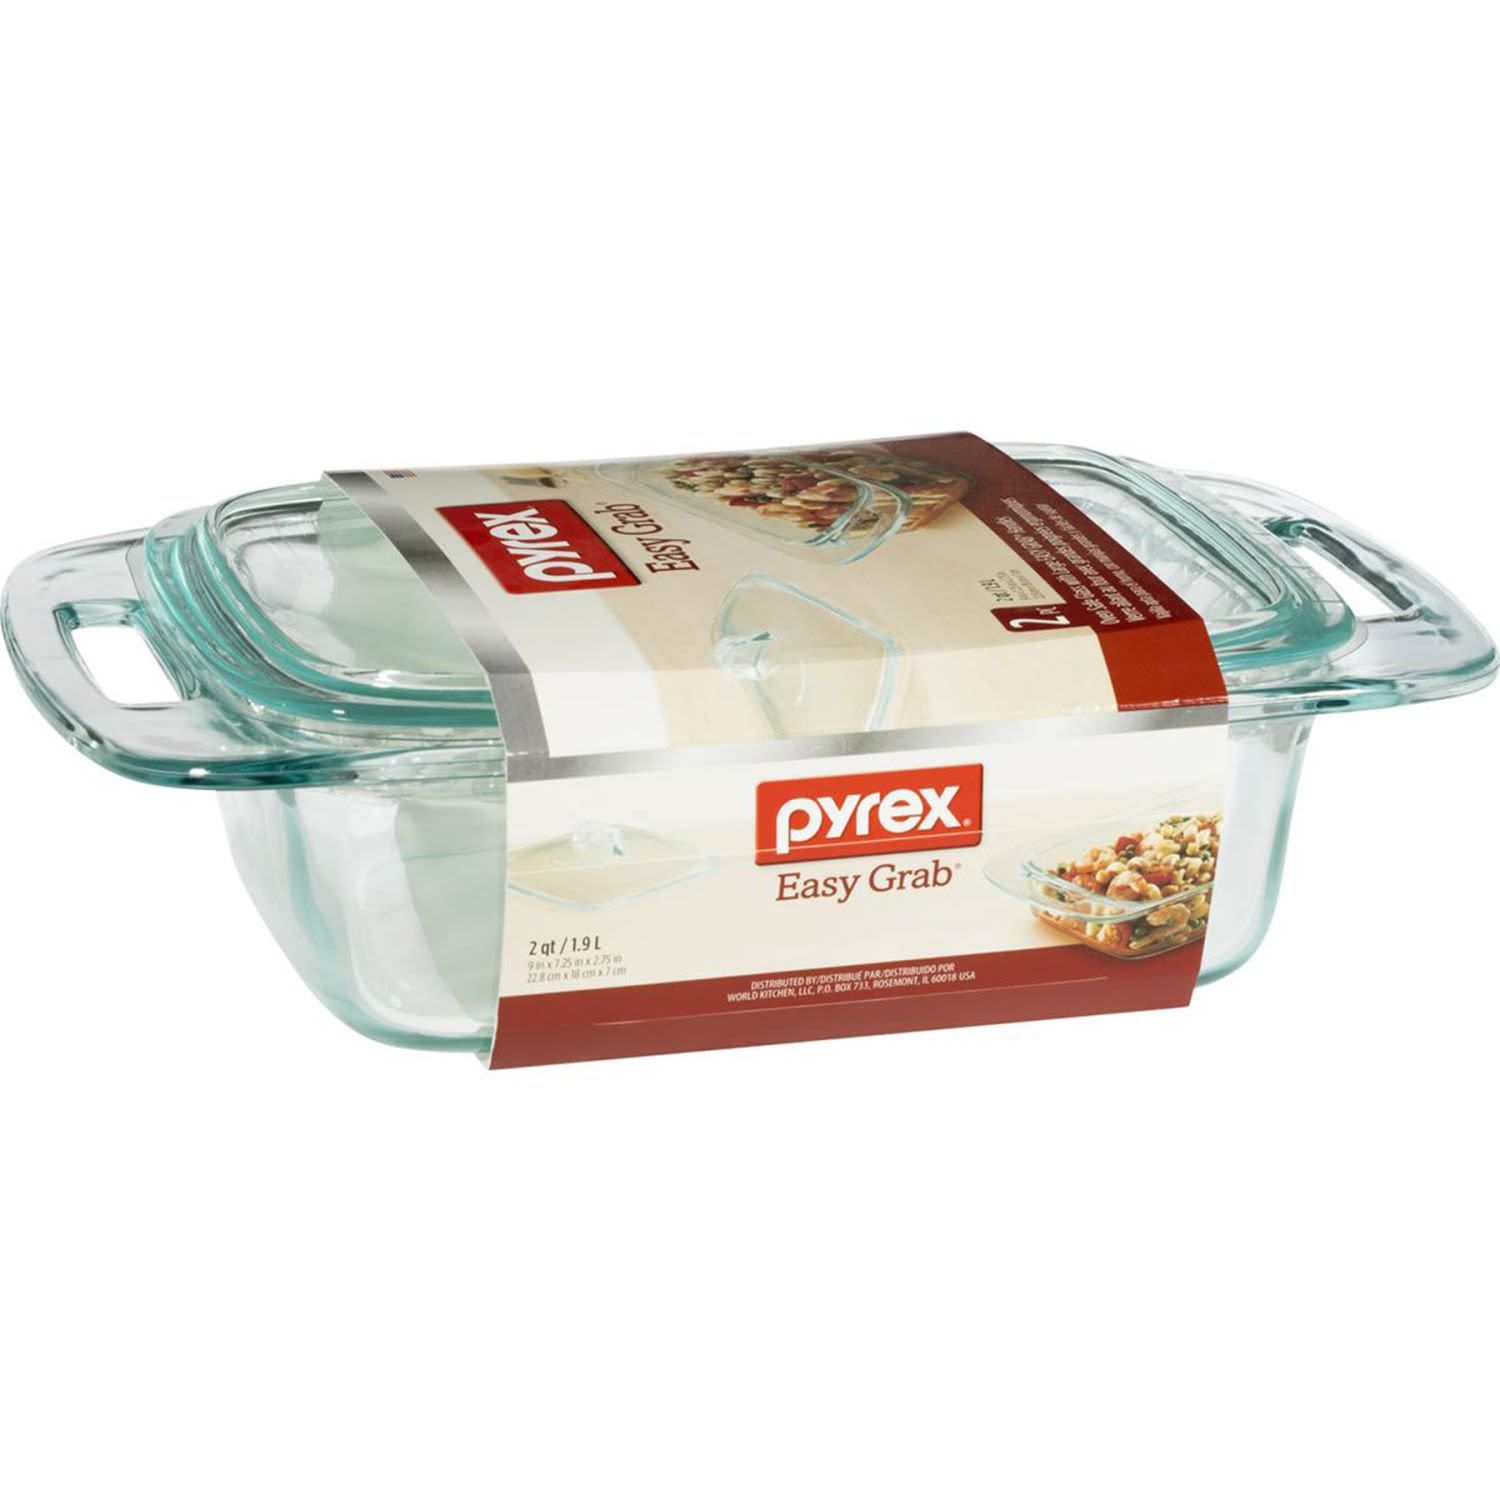 Pyrex 1.9L Easygrab Covered Casserole Dish, 1 Each